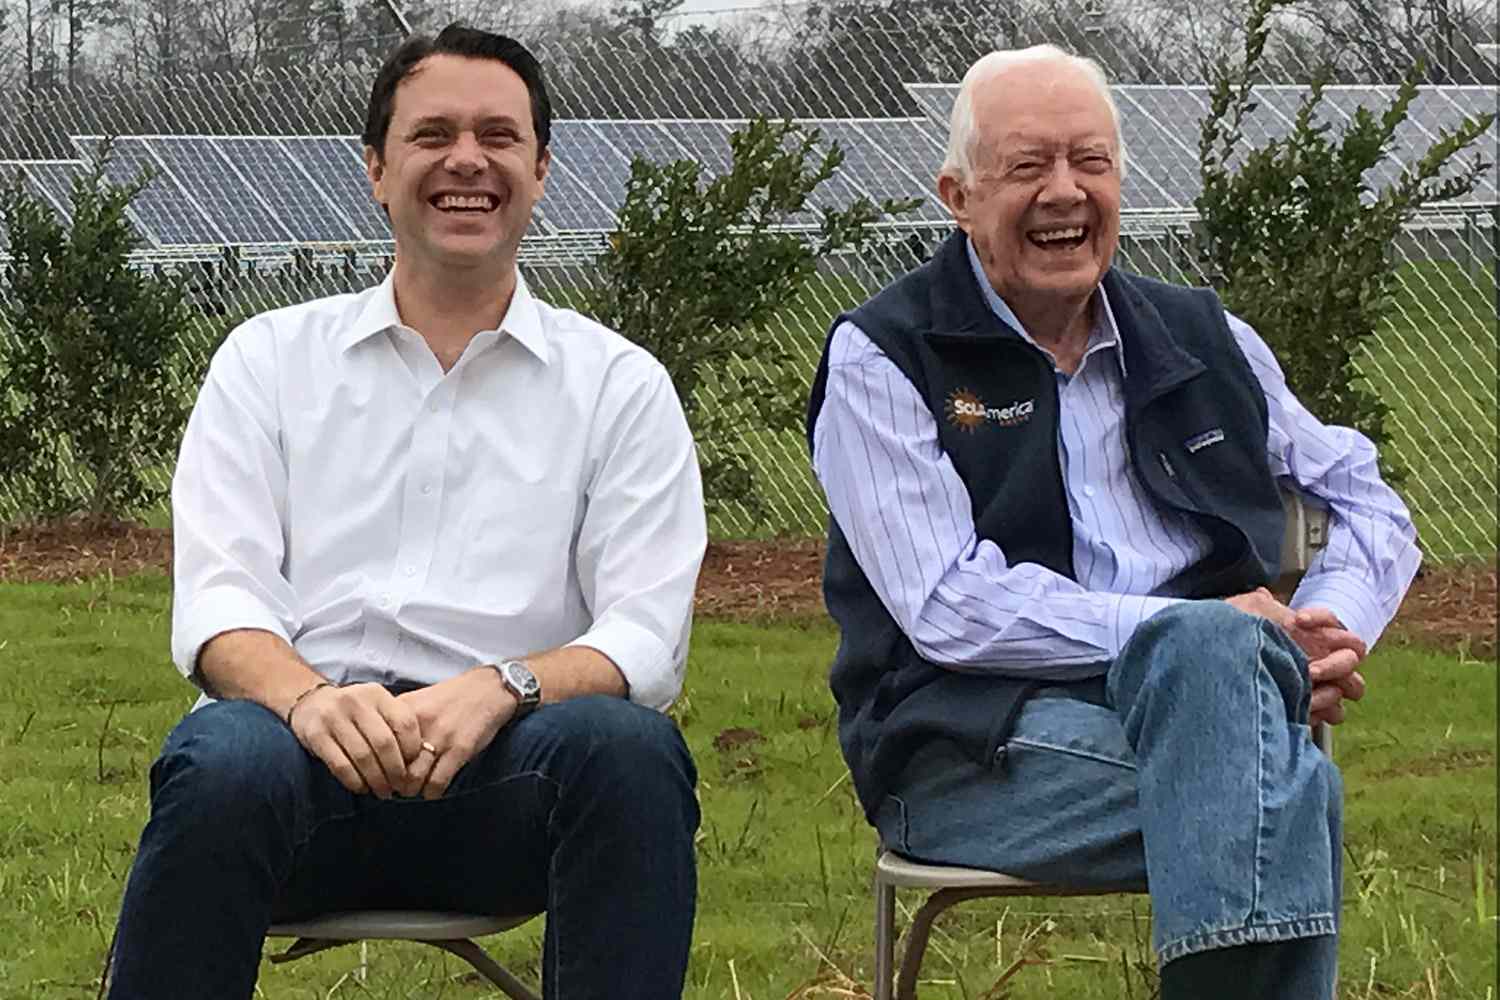 Jimmy Carter's Grandson Laughs Recalling Chat with Grandpa Where They Were Both Puzzled by His Health